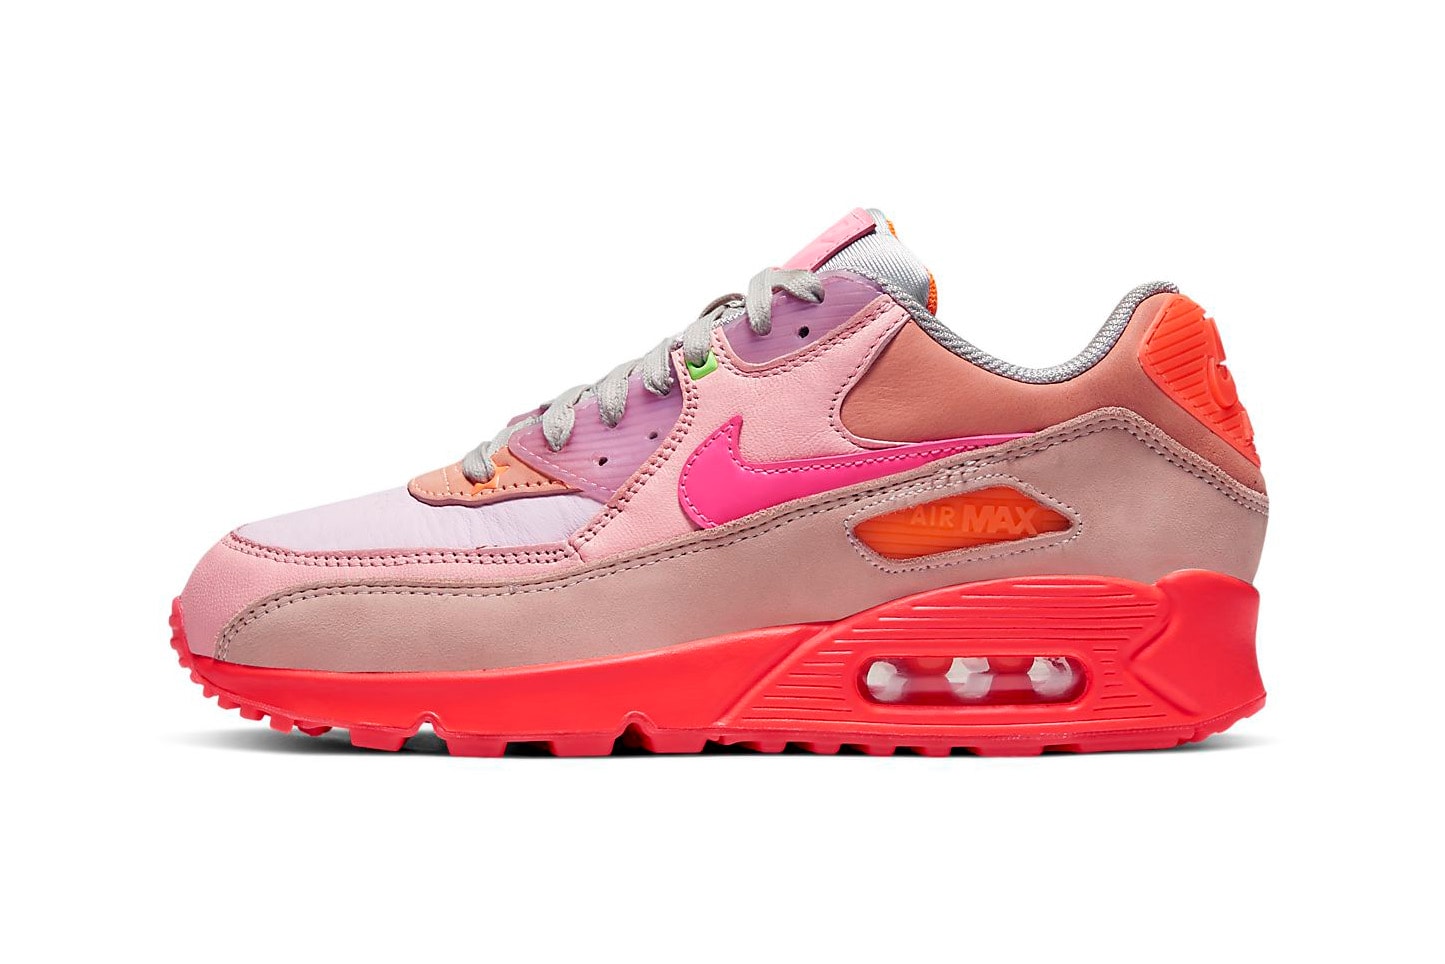 Nike Air Max 90 Bright Crimson Removable Swoosh Neon Pink Red